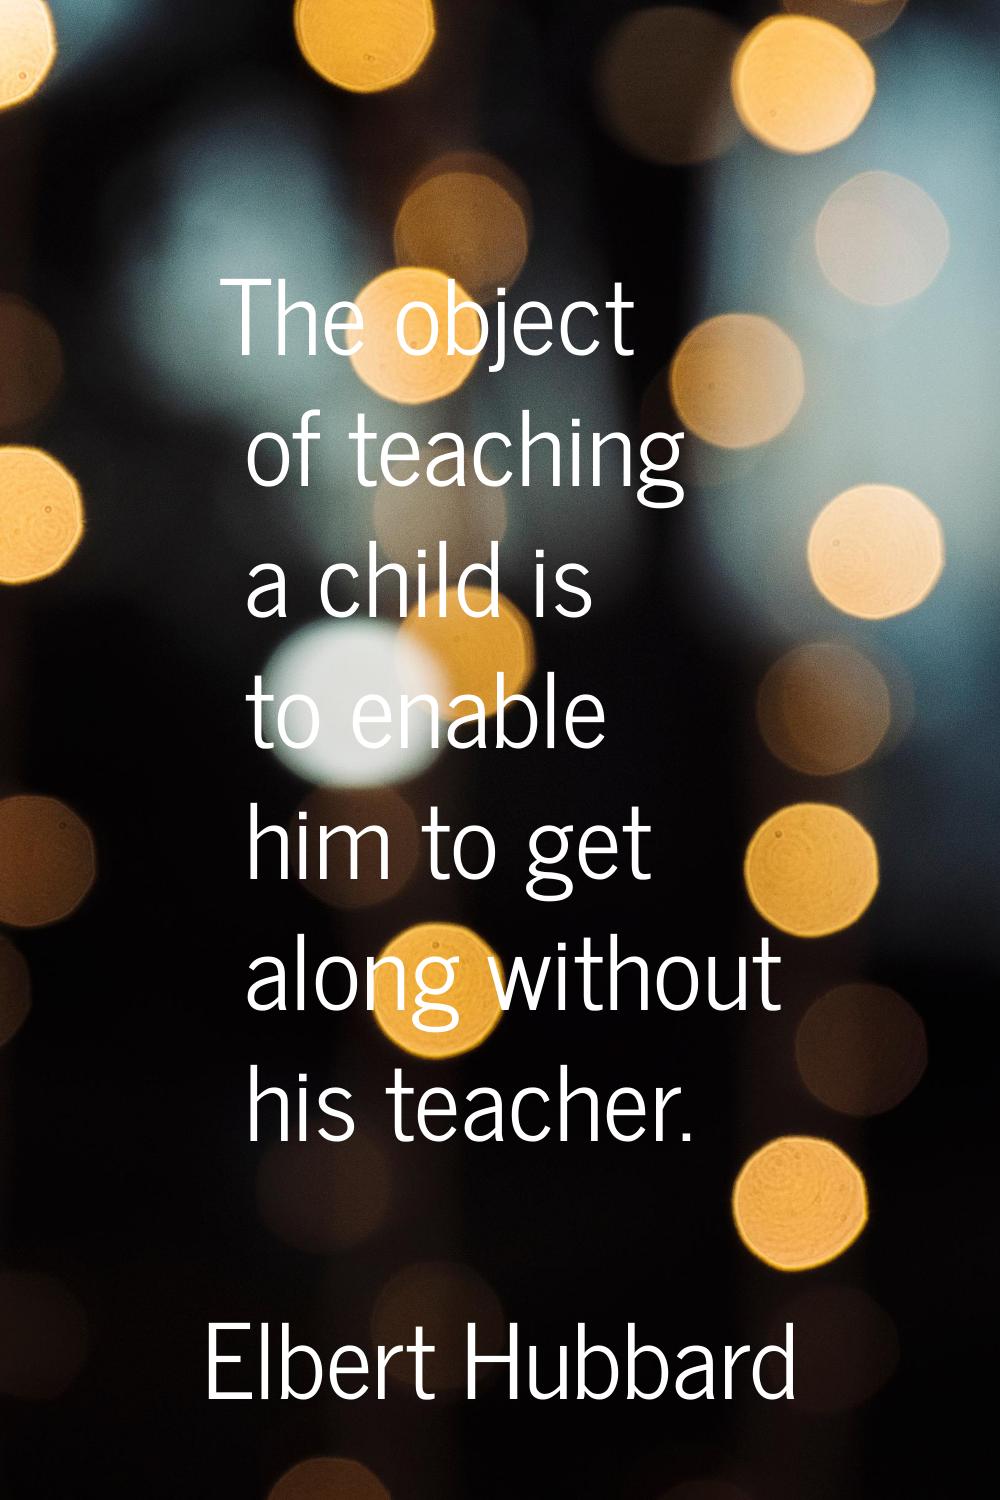 The object of teaching a child is to enable him to get along without his teacher.